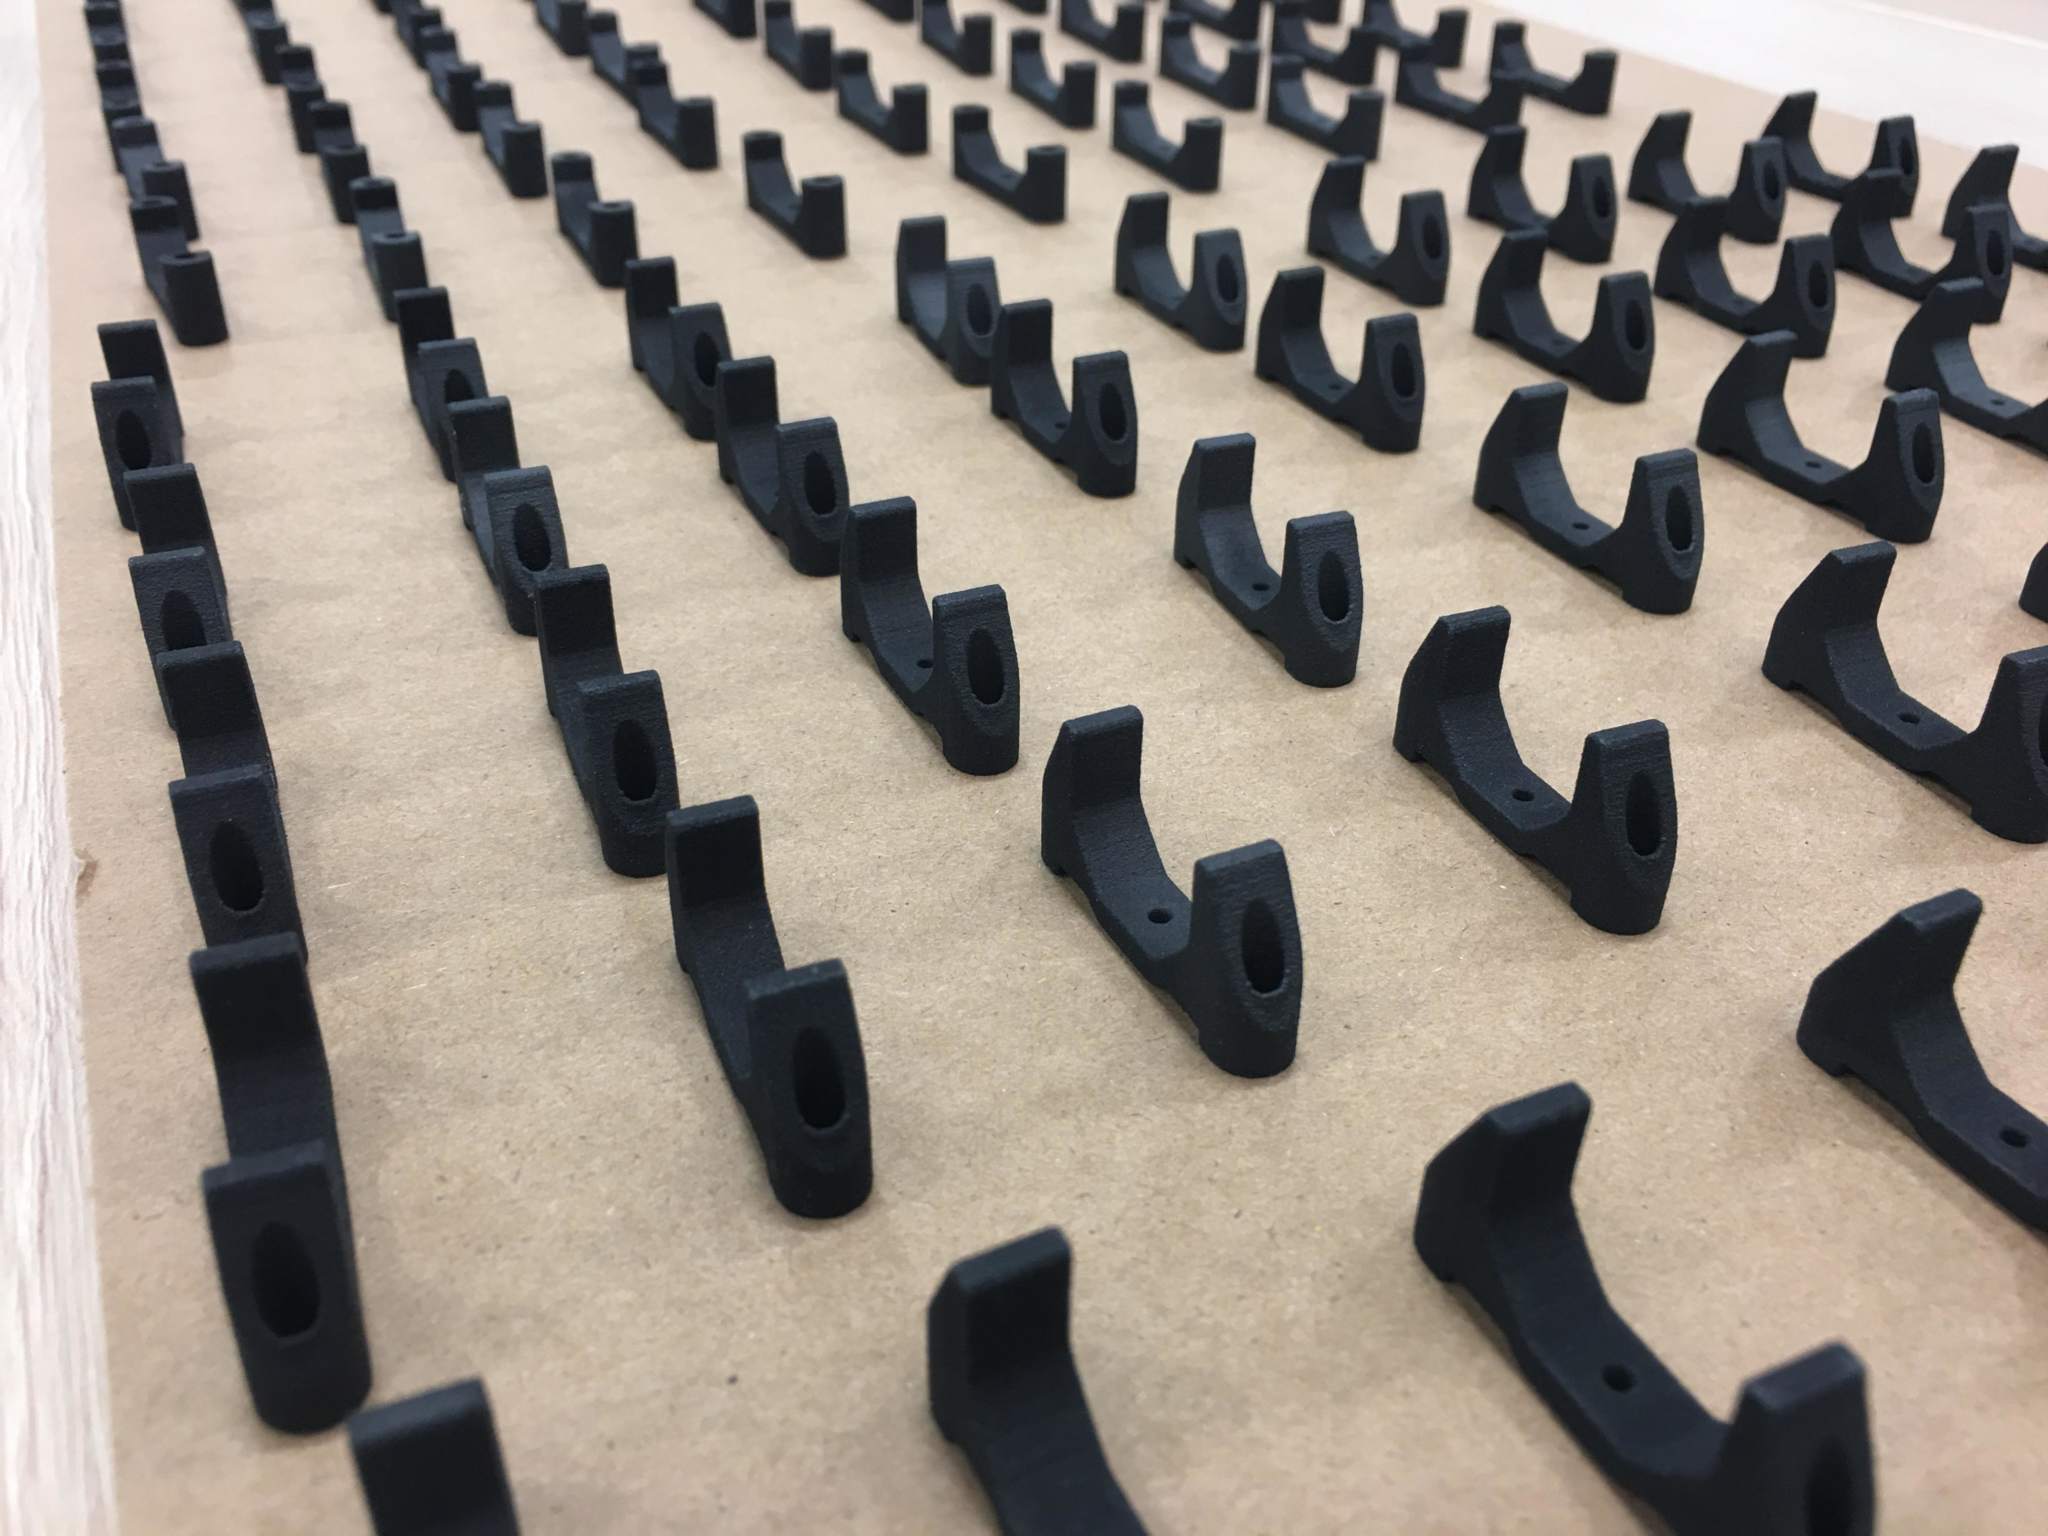 Immensa利用其专有的后处理卫理公会教徒ds to produce black parts for a client. Image via Immensa Labs.